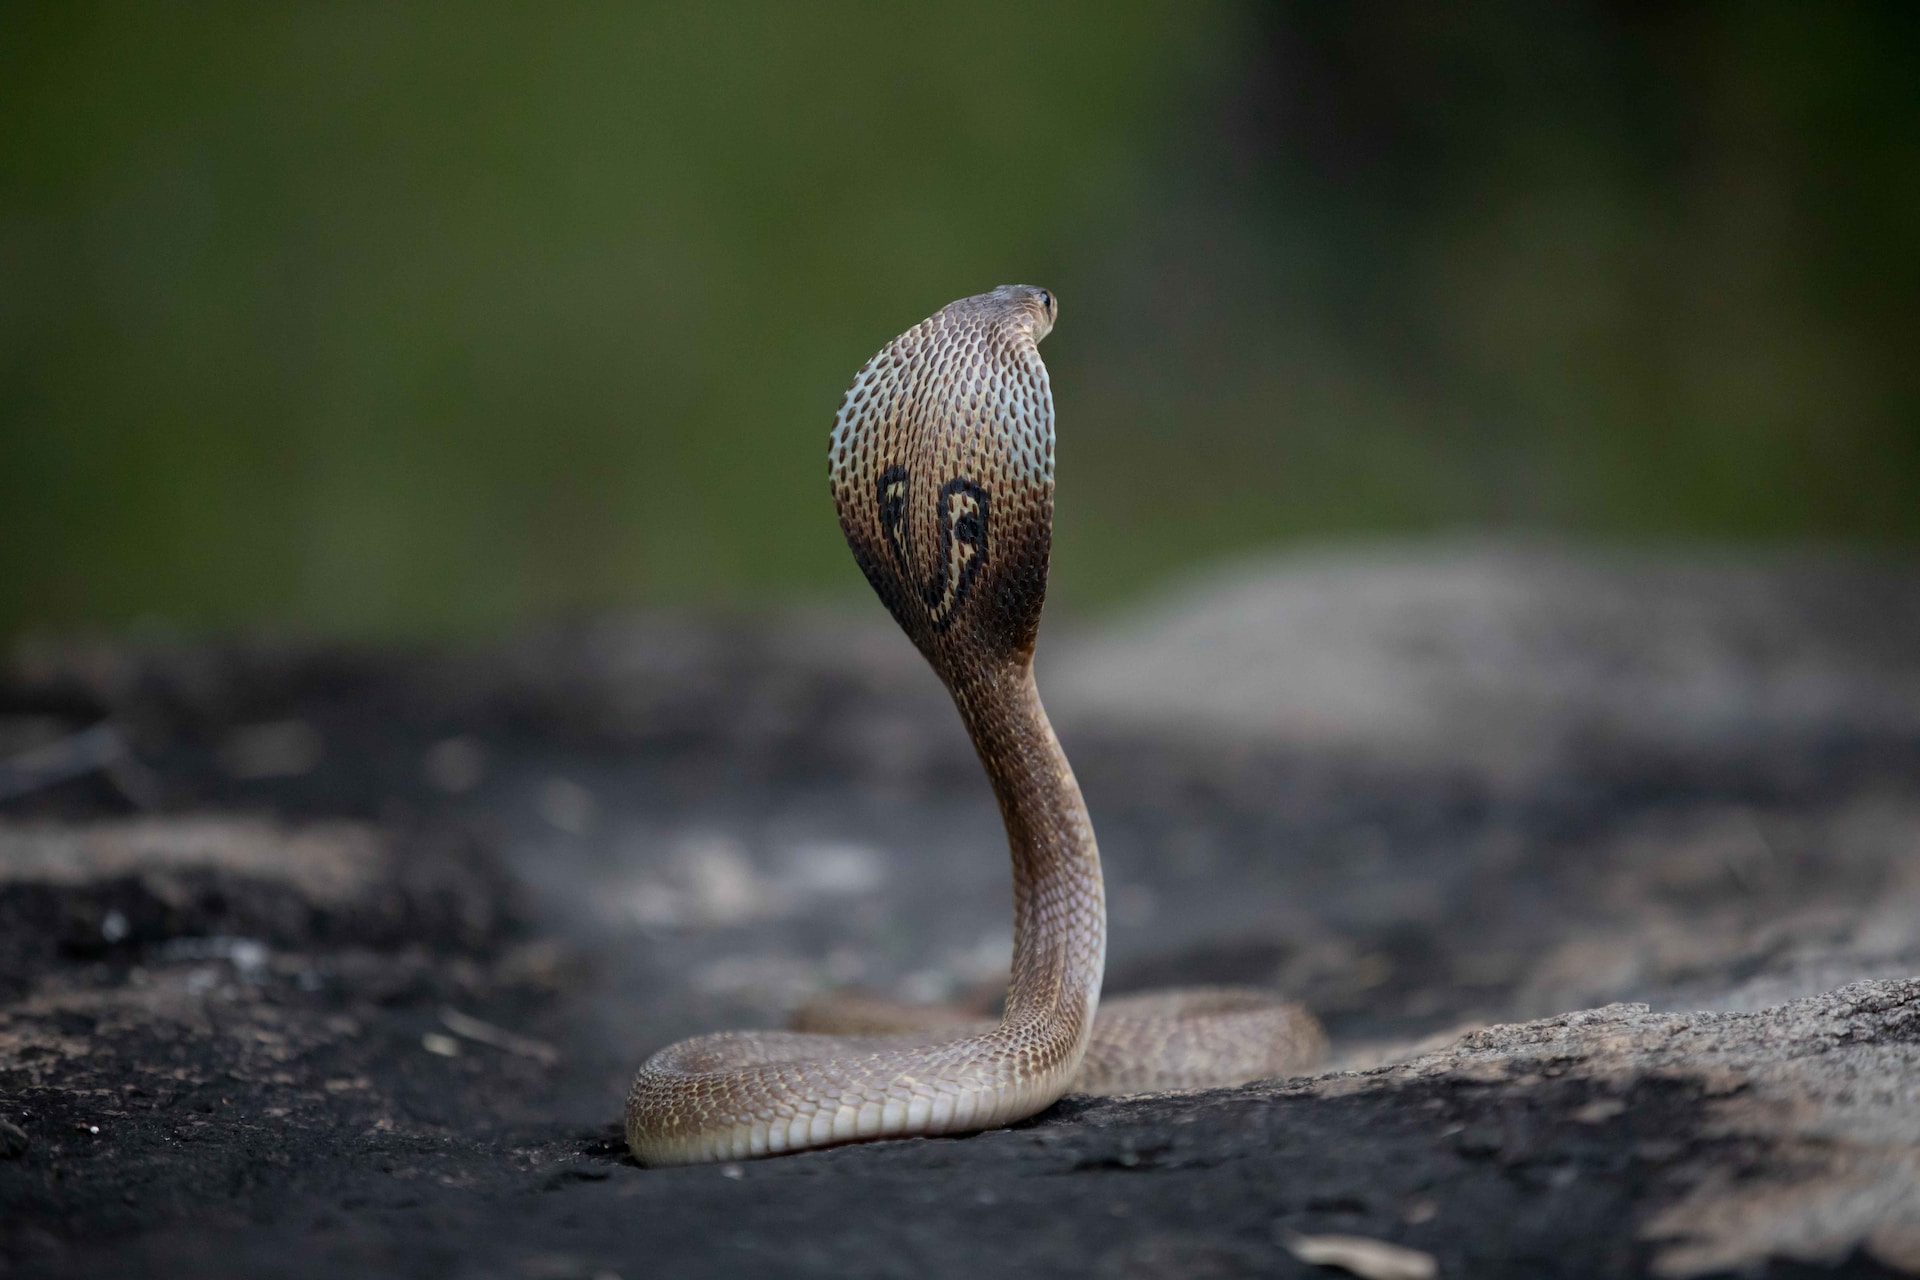 Top 10 Fascinating Facts About Snakes You Might Not Know